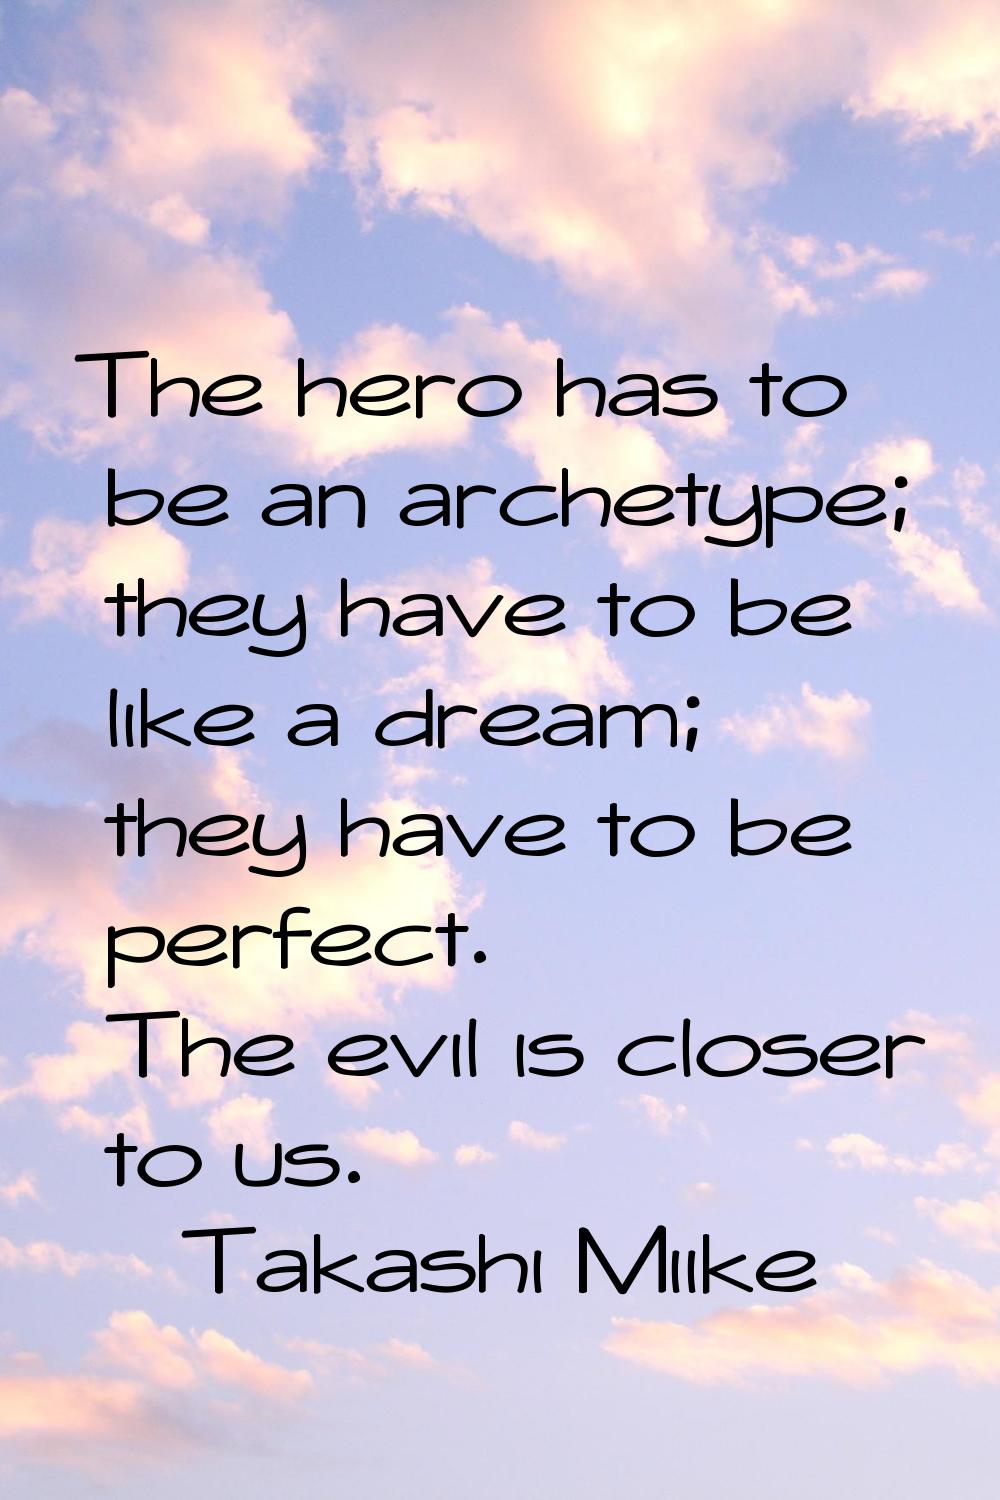 The hero has to be an archetype; they have to be like a dream; they have to be perfect. The evil is